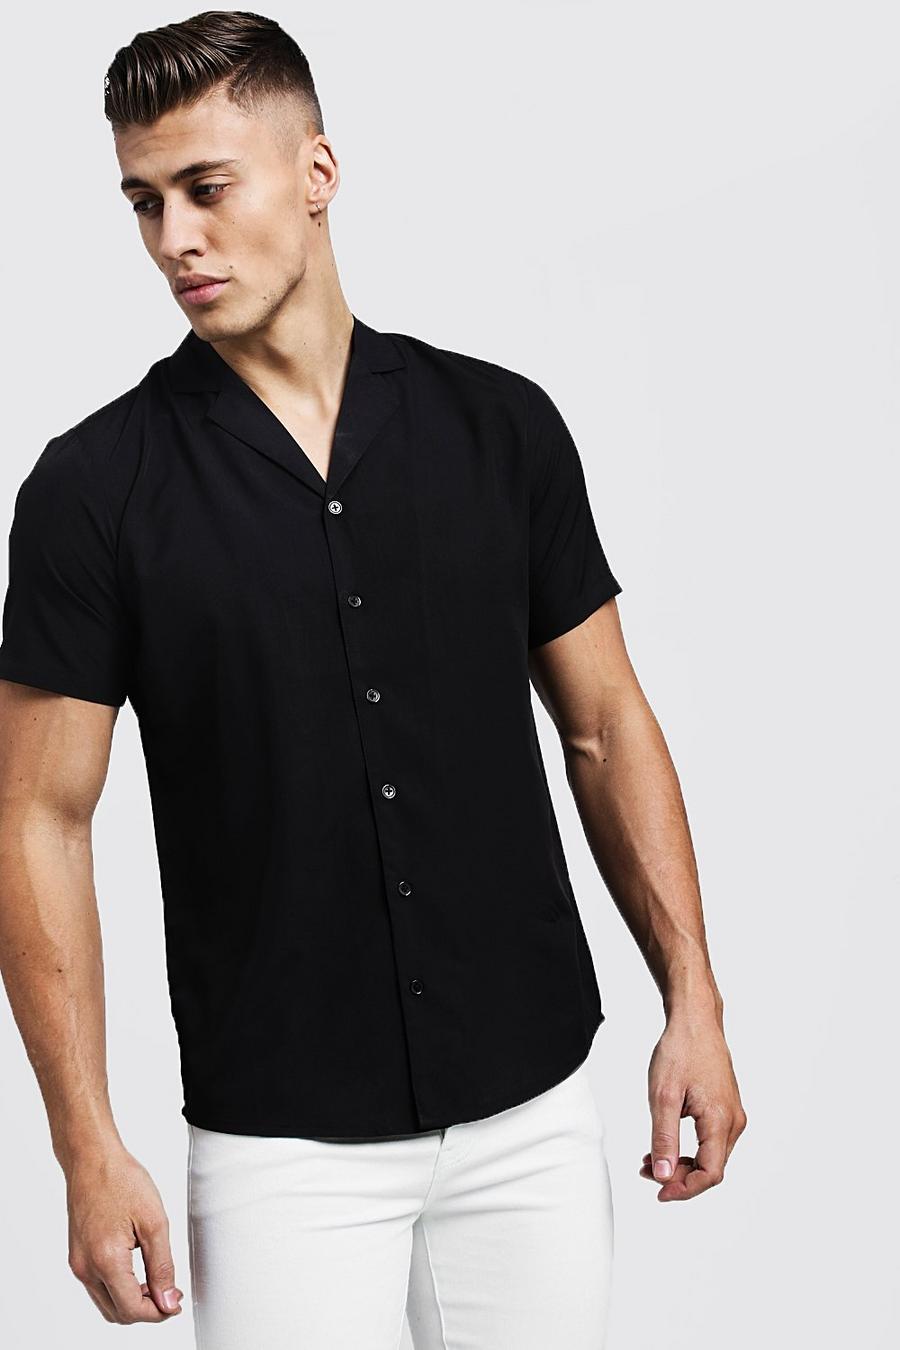 Black negro Short Sleeve Shirt With Revere Collar image number 1